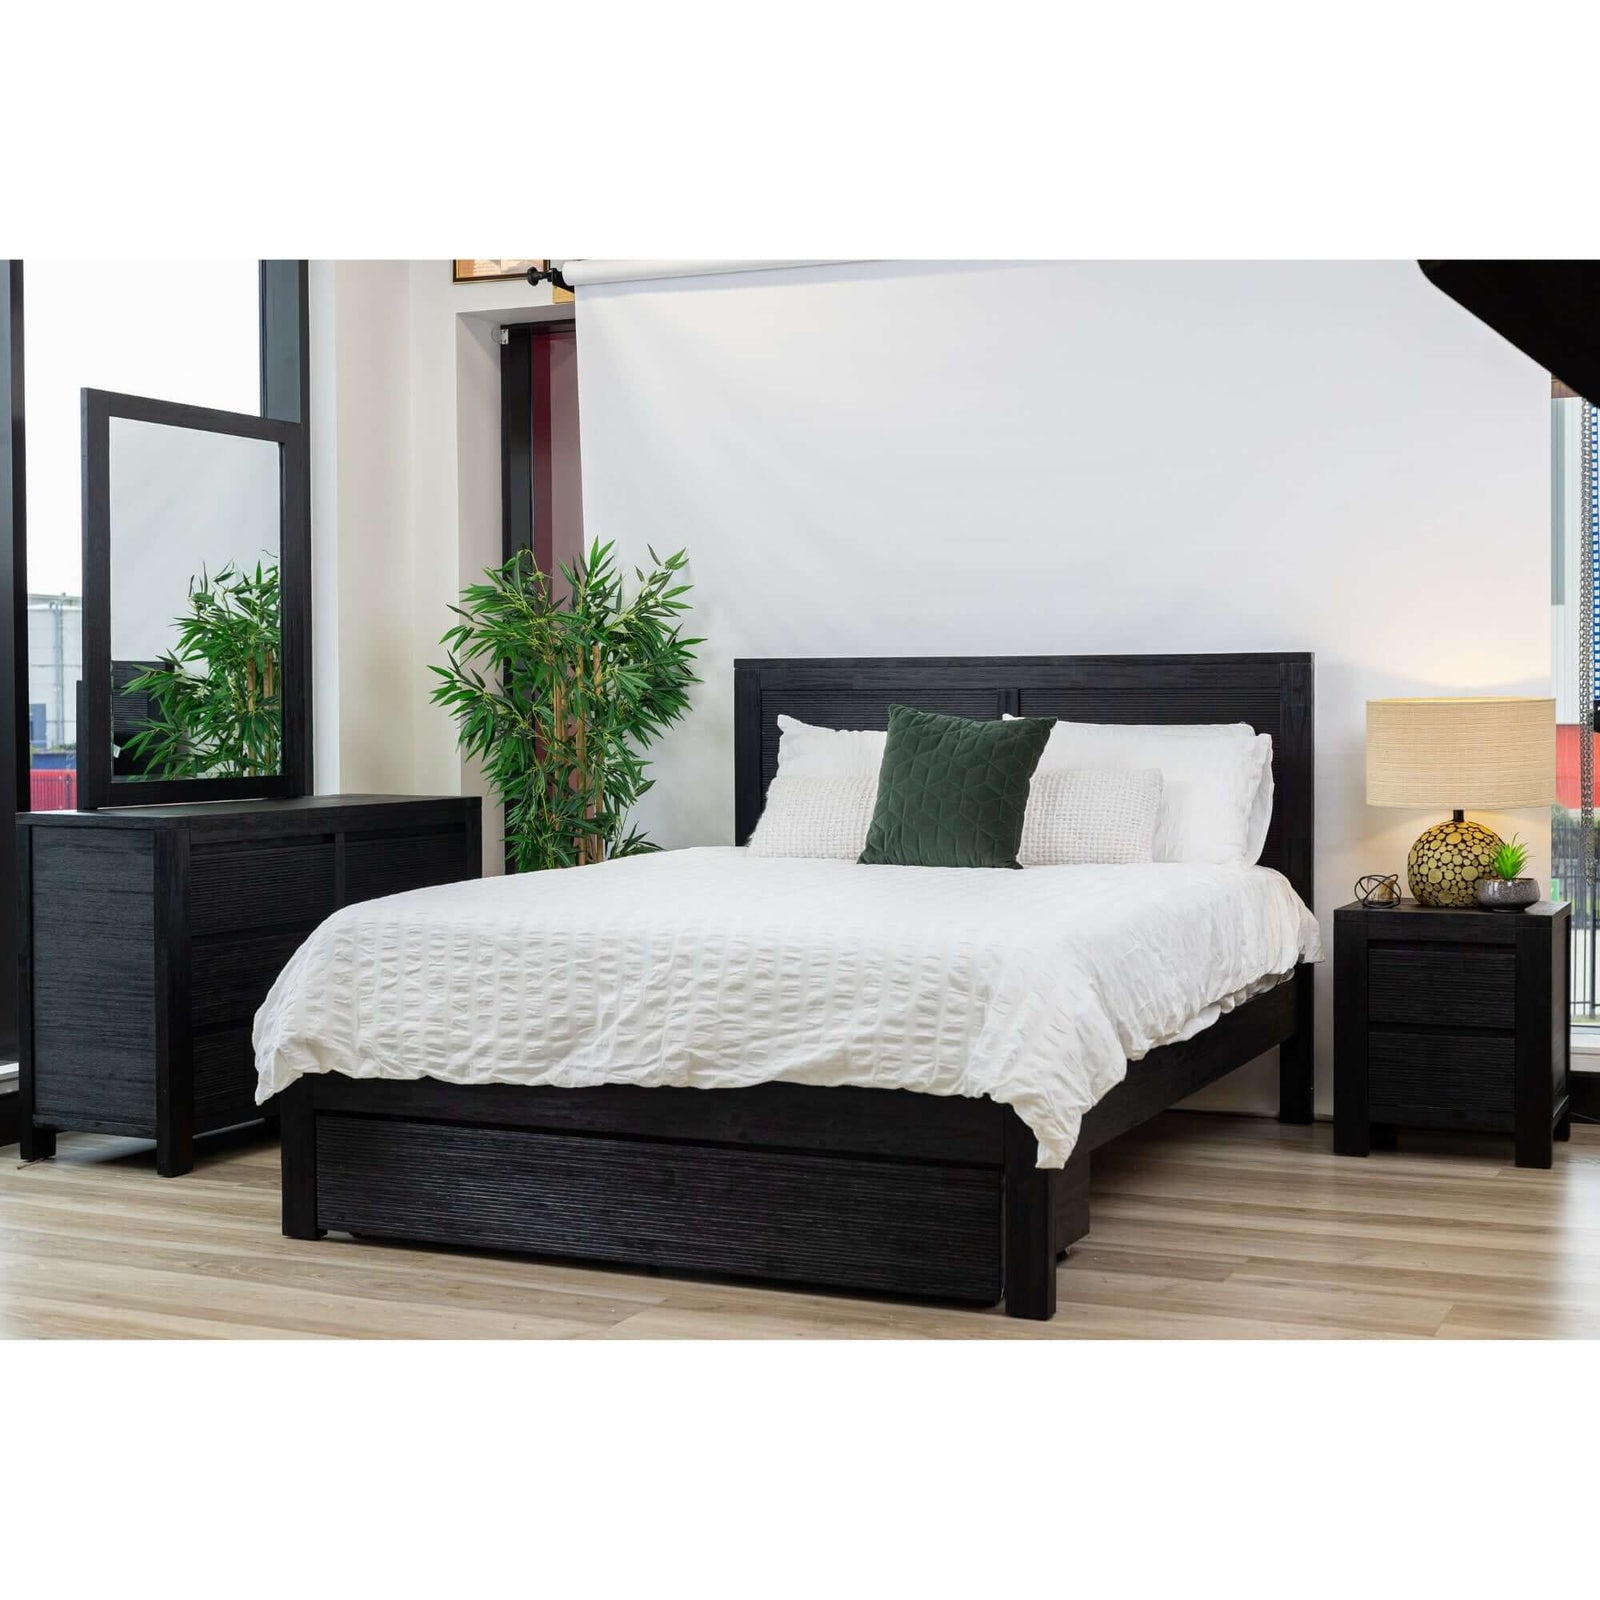 Queen Tofino Bed Frame with Storage - Black-Upinteriors